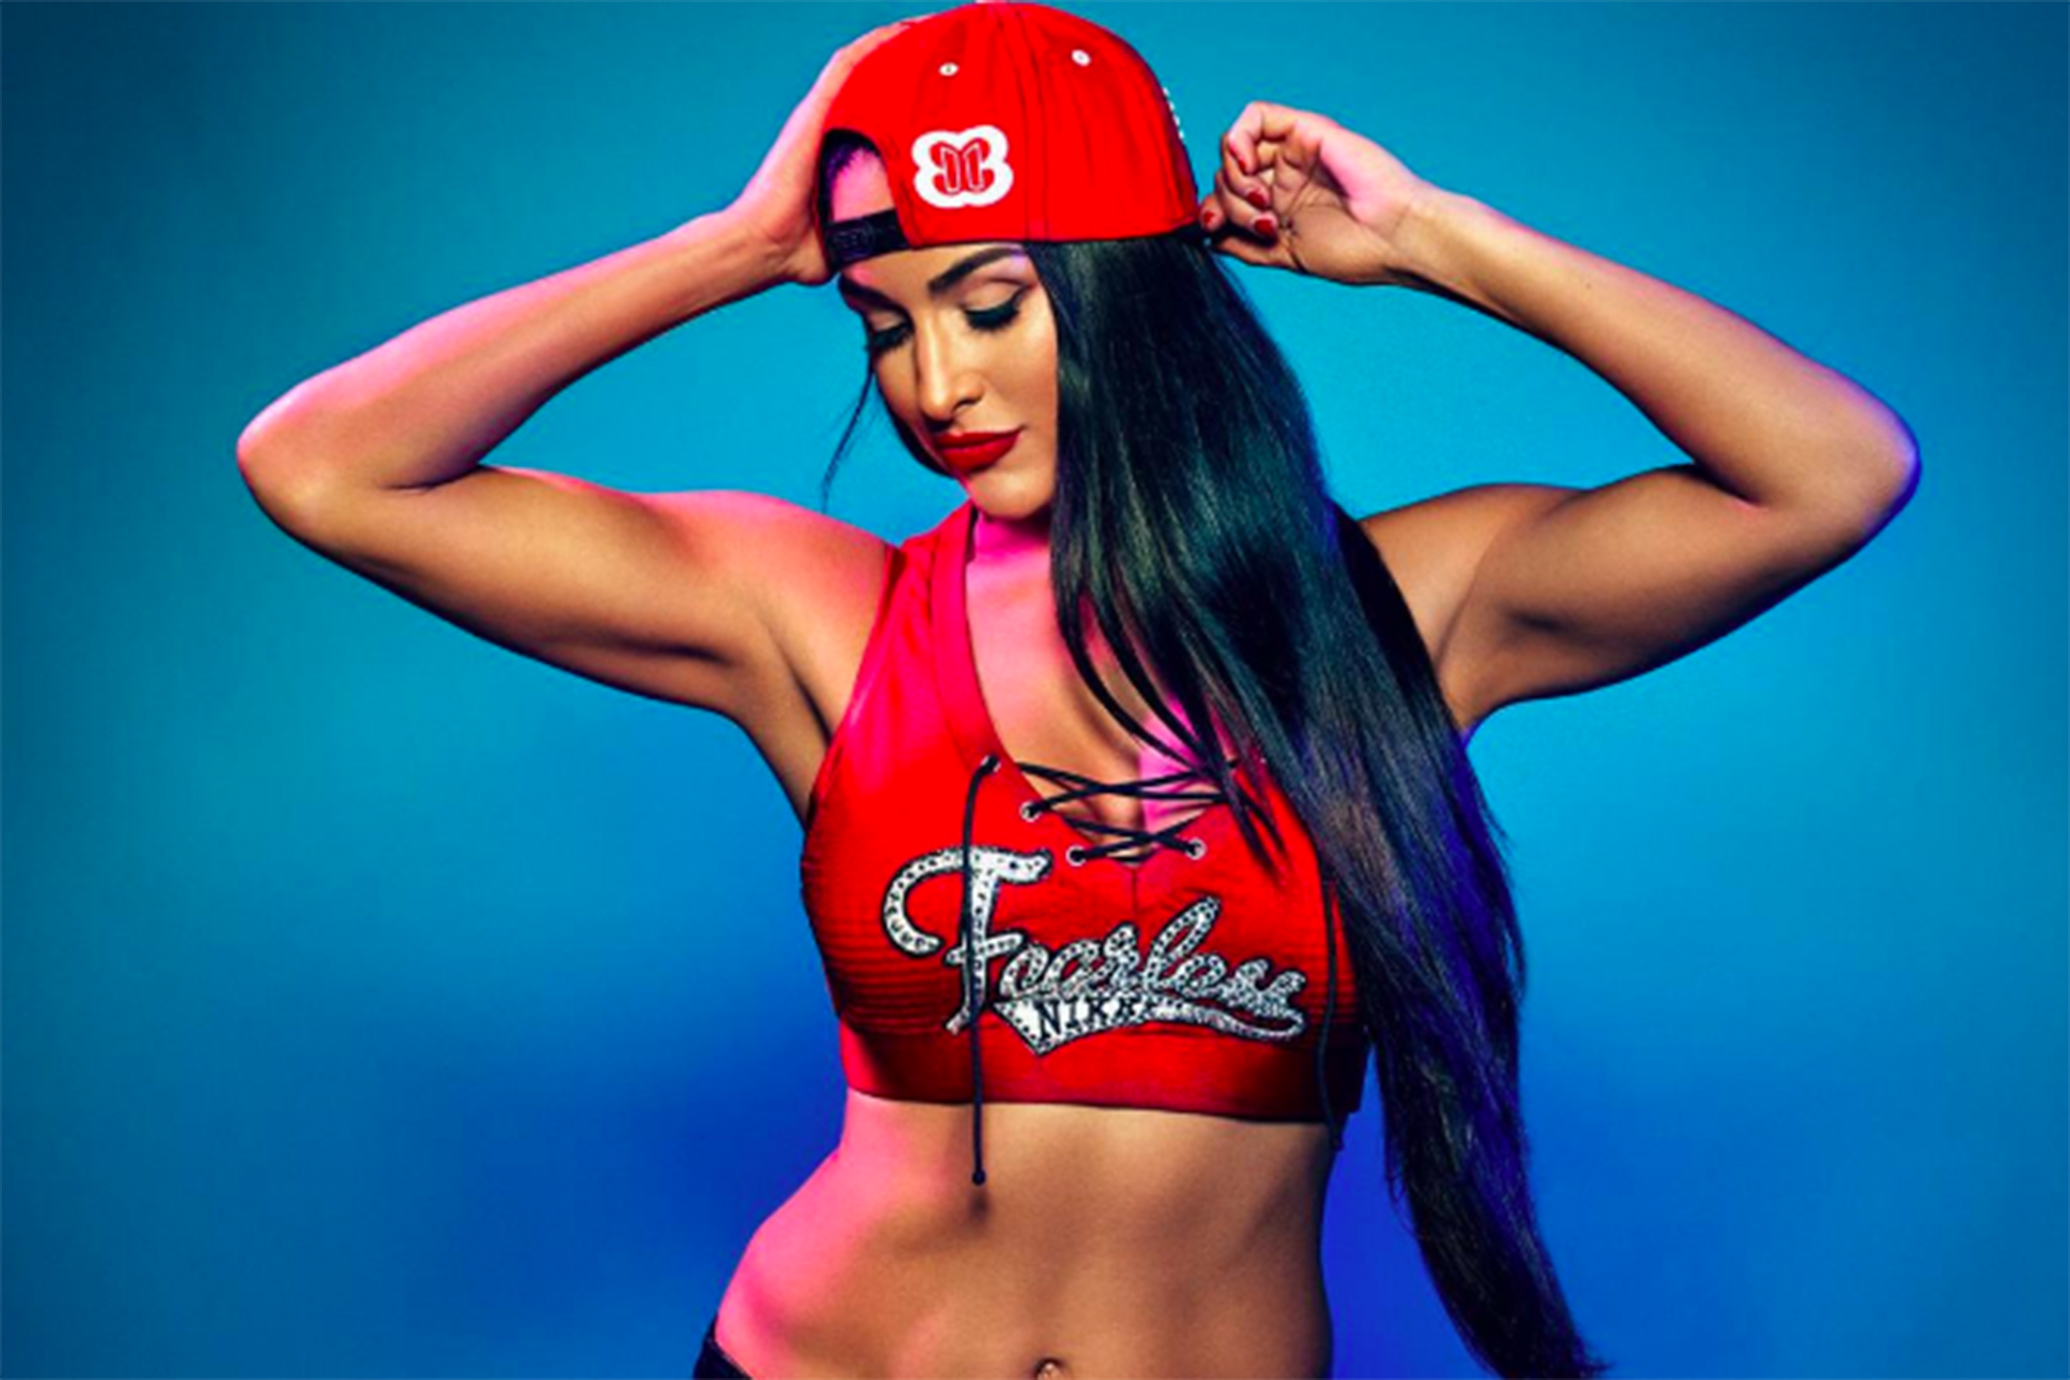 Nikki Bella Wants to Change the Name of Total Divas - TV Guide